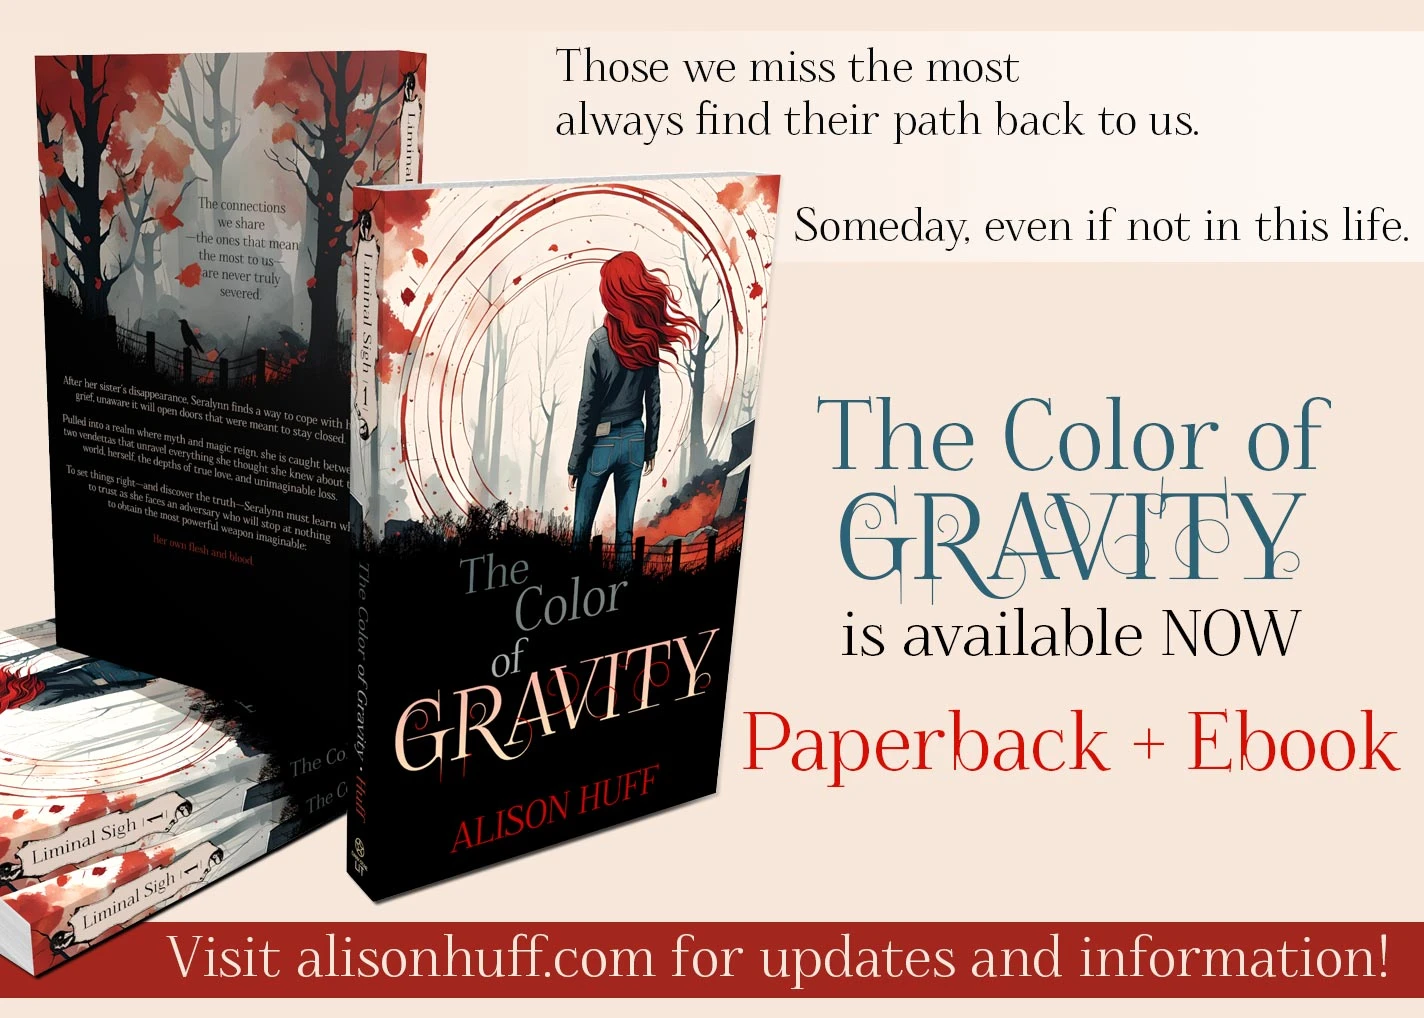 promo image for the color of gravity, a fantasy novel by alison huff